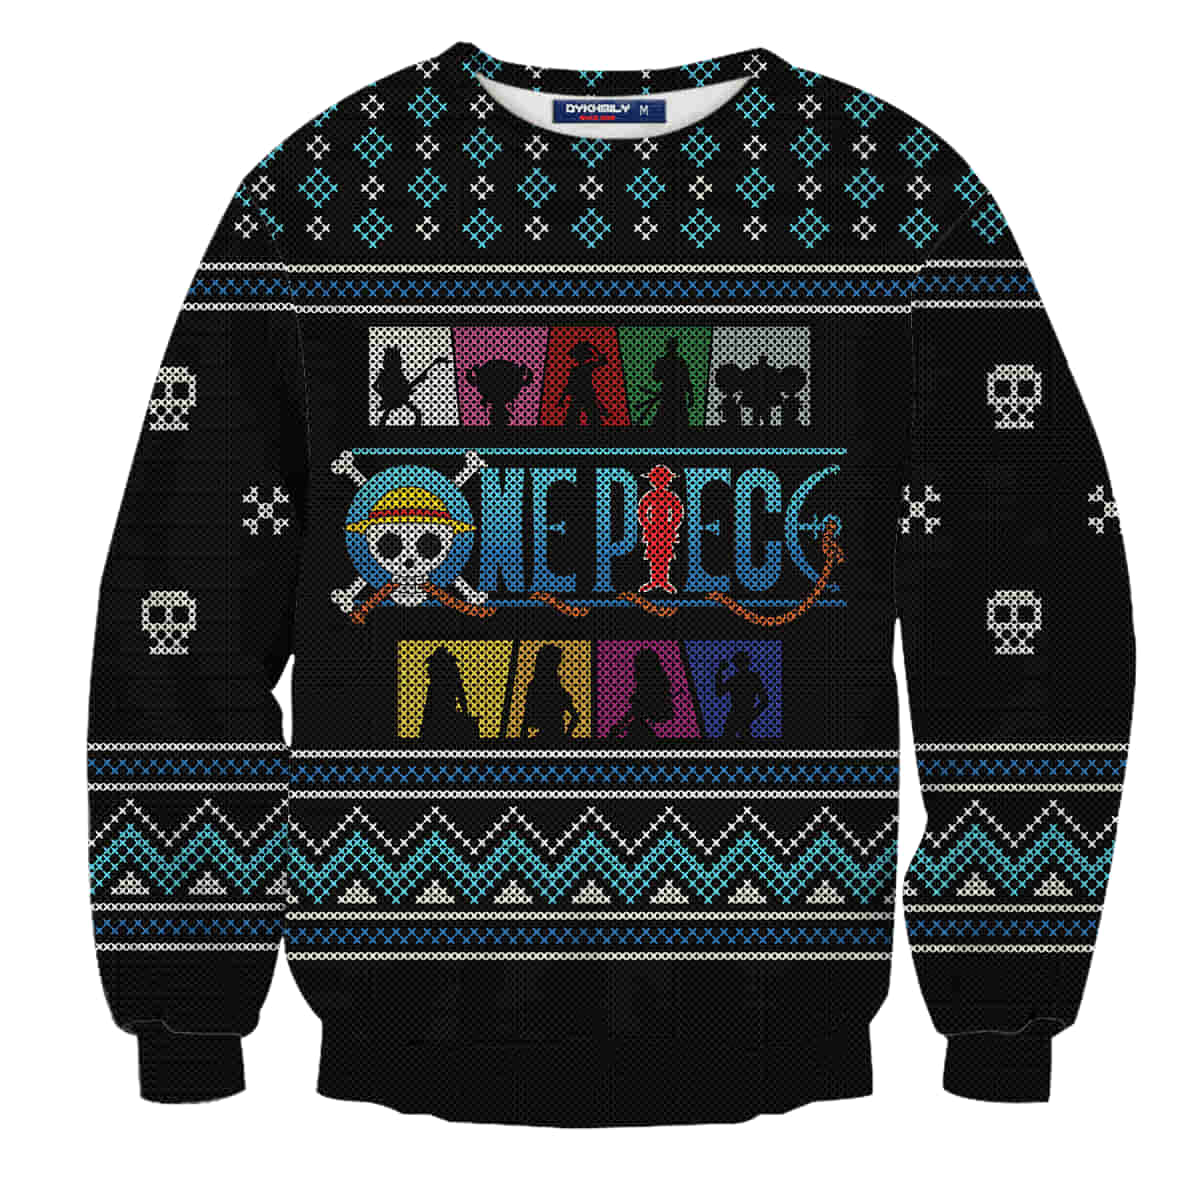 Top-selling Item] One Piece Going Merry Christmas Wool Knitted Sweater